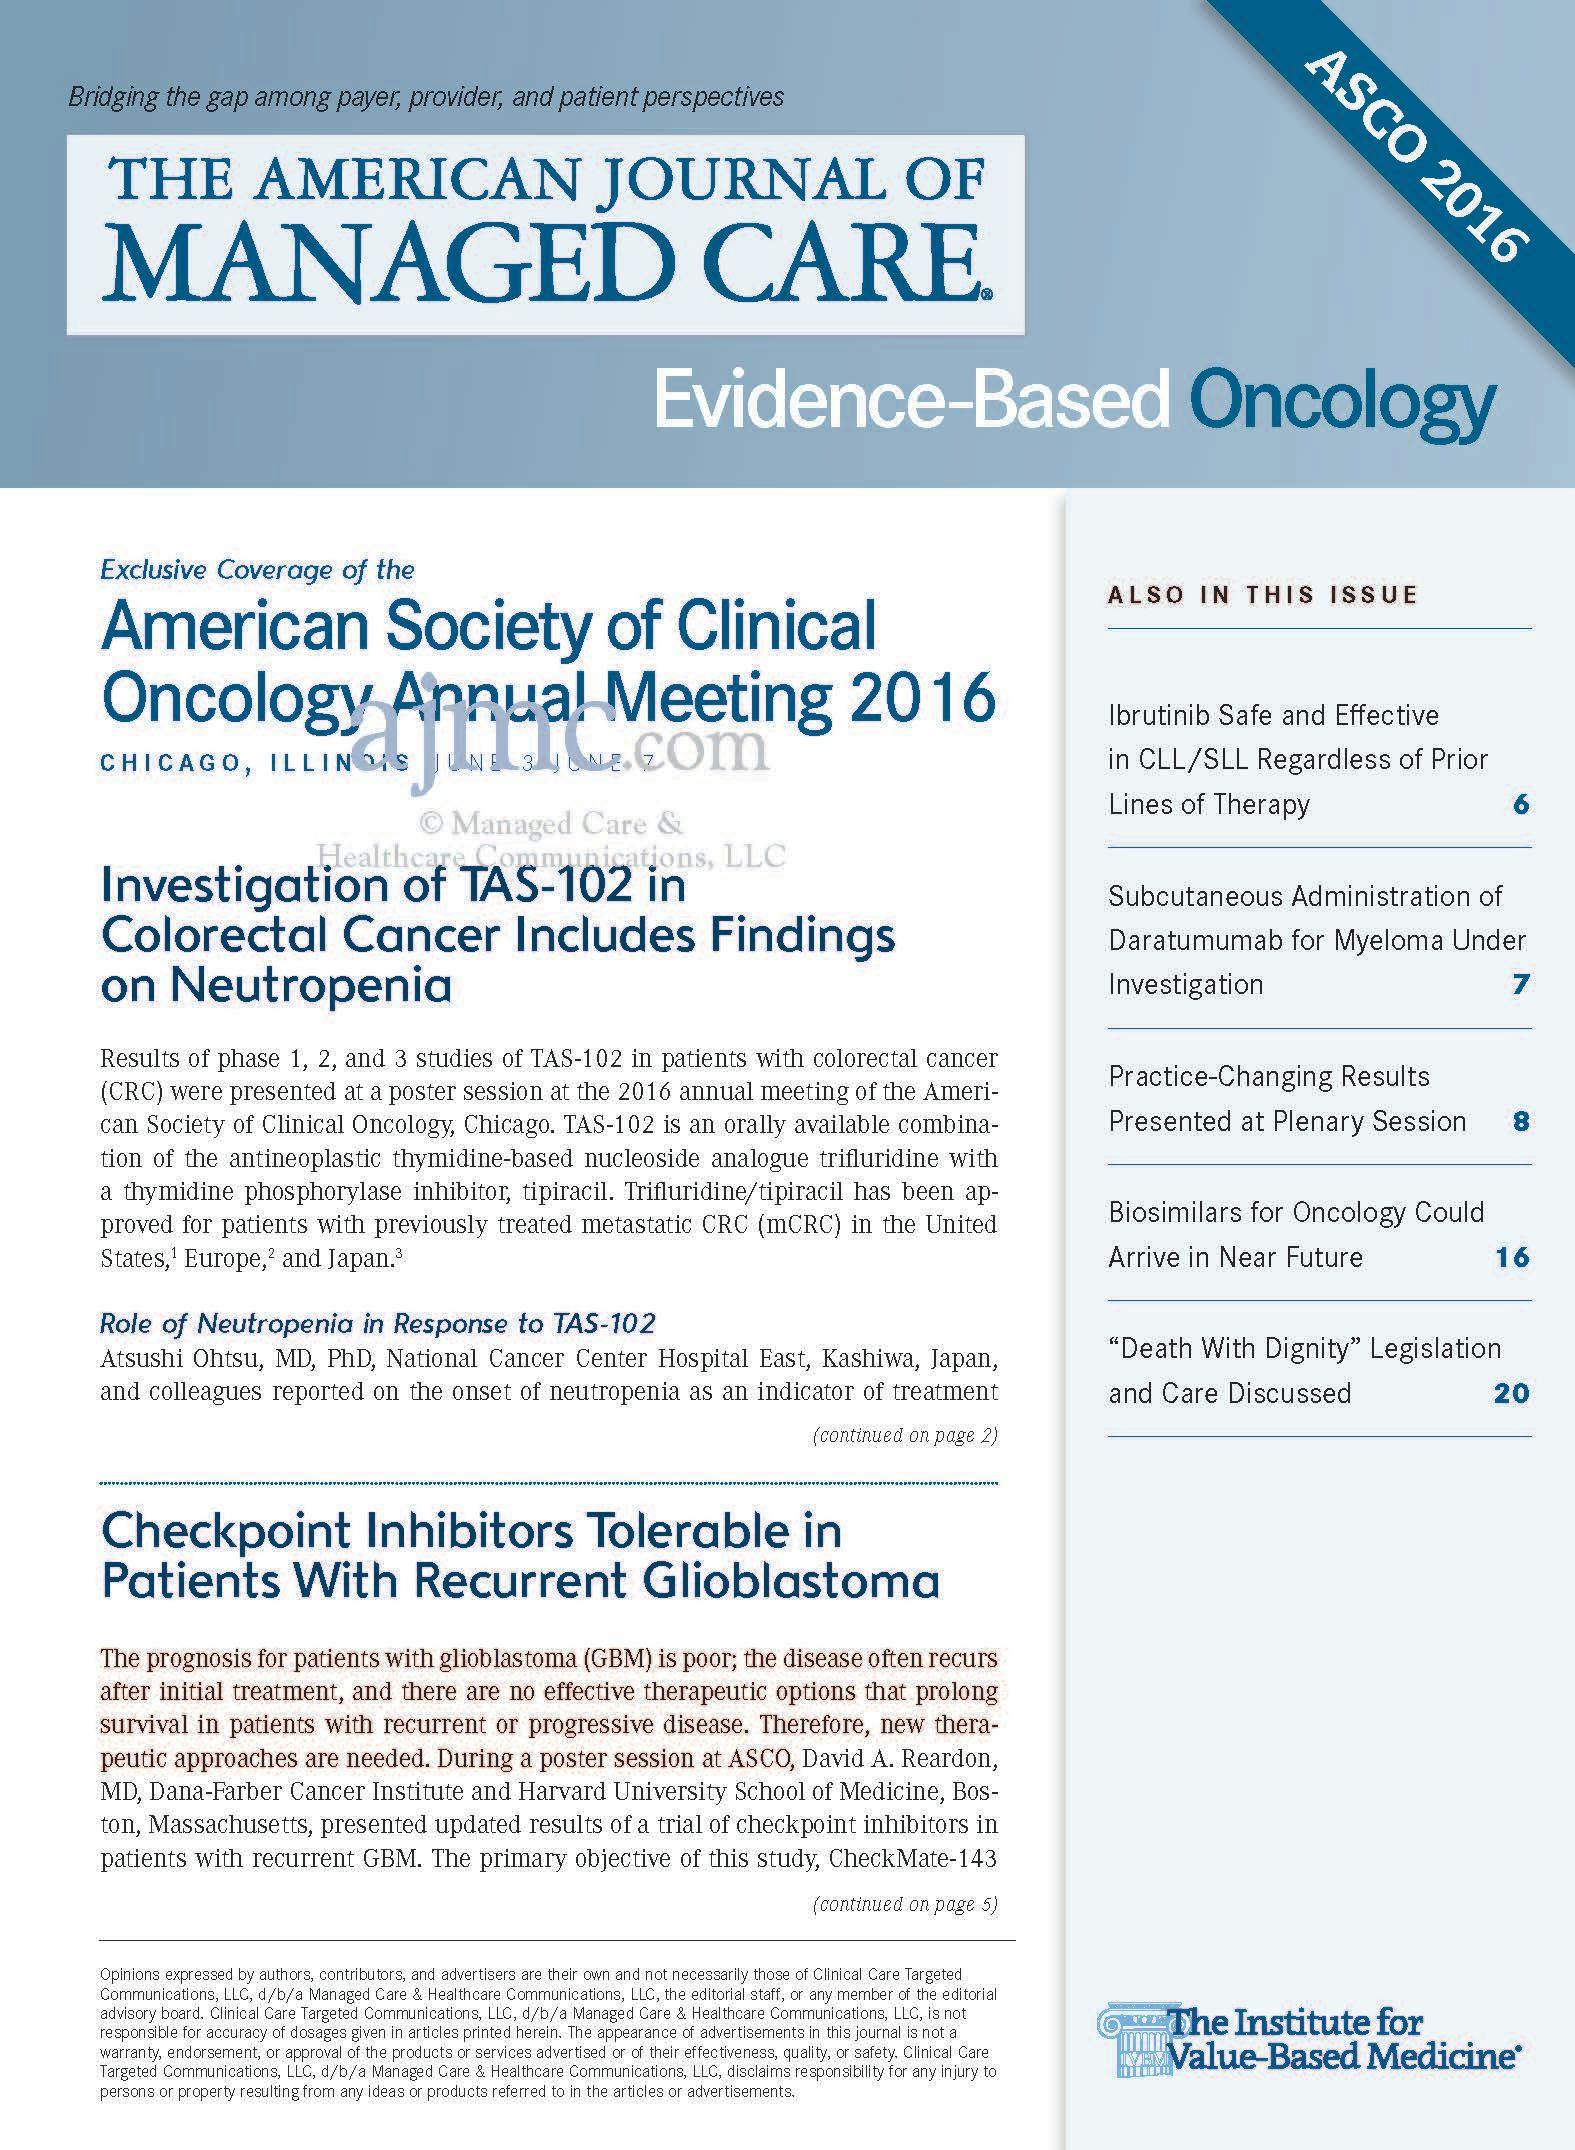 Exclusive Coverage of the American Society of Clinical Oncology Annual Meeting 2016 Chicago, Illinoi